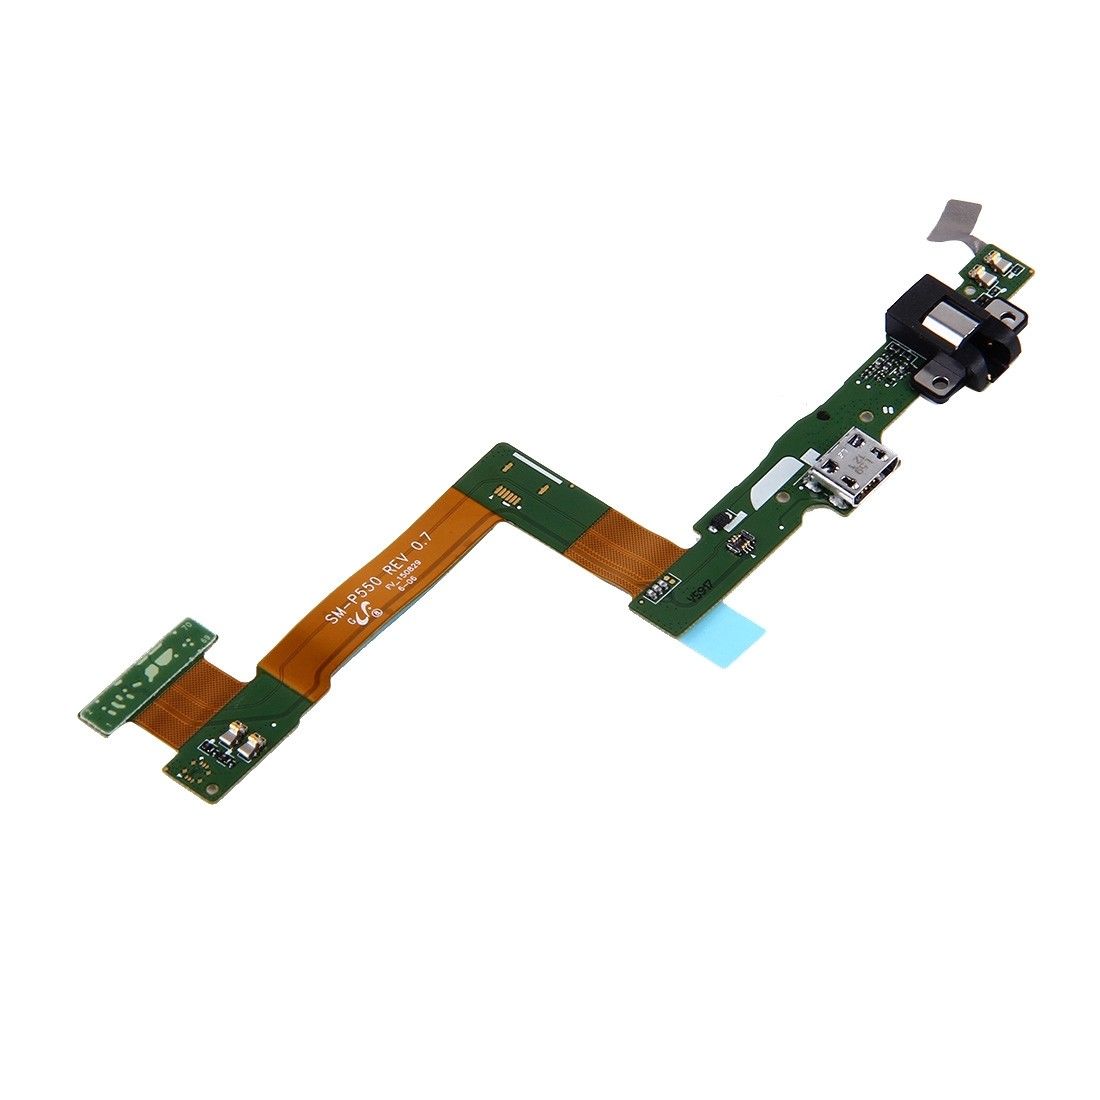 Samsung Galaxy Tab A 9.7 P550 USB Charging Port Connector Flex Cable for [product_price] - First Help Tech